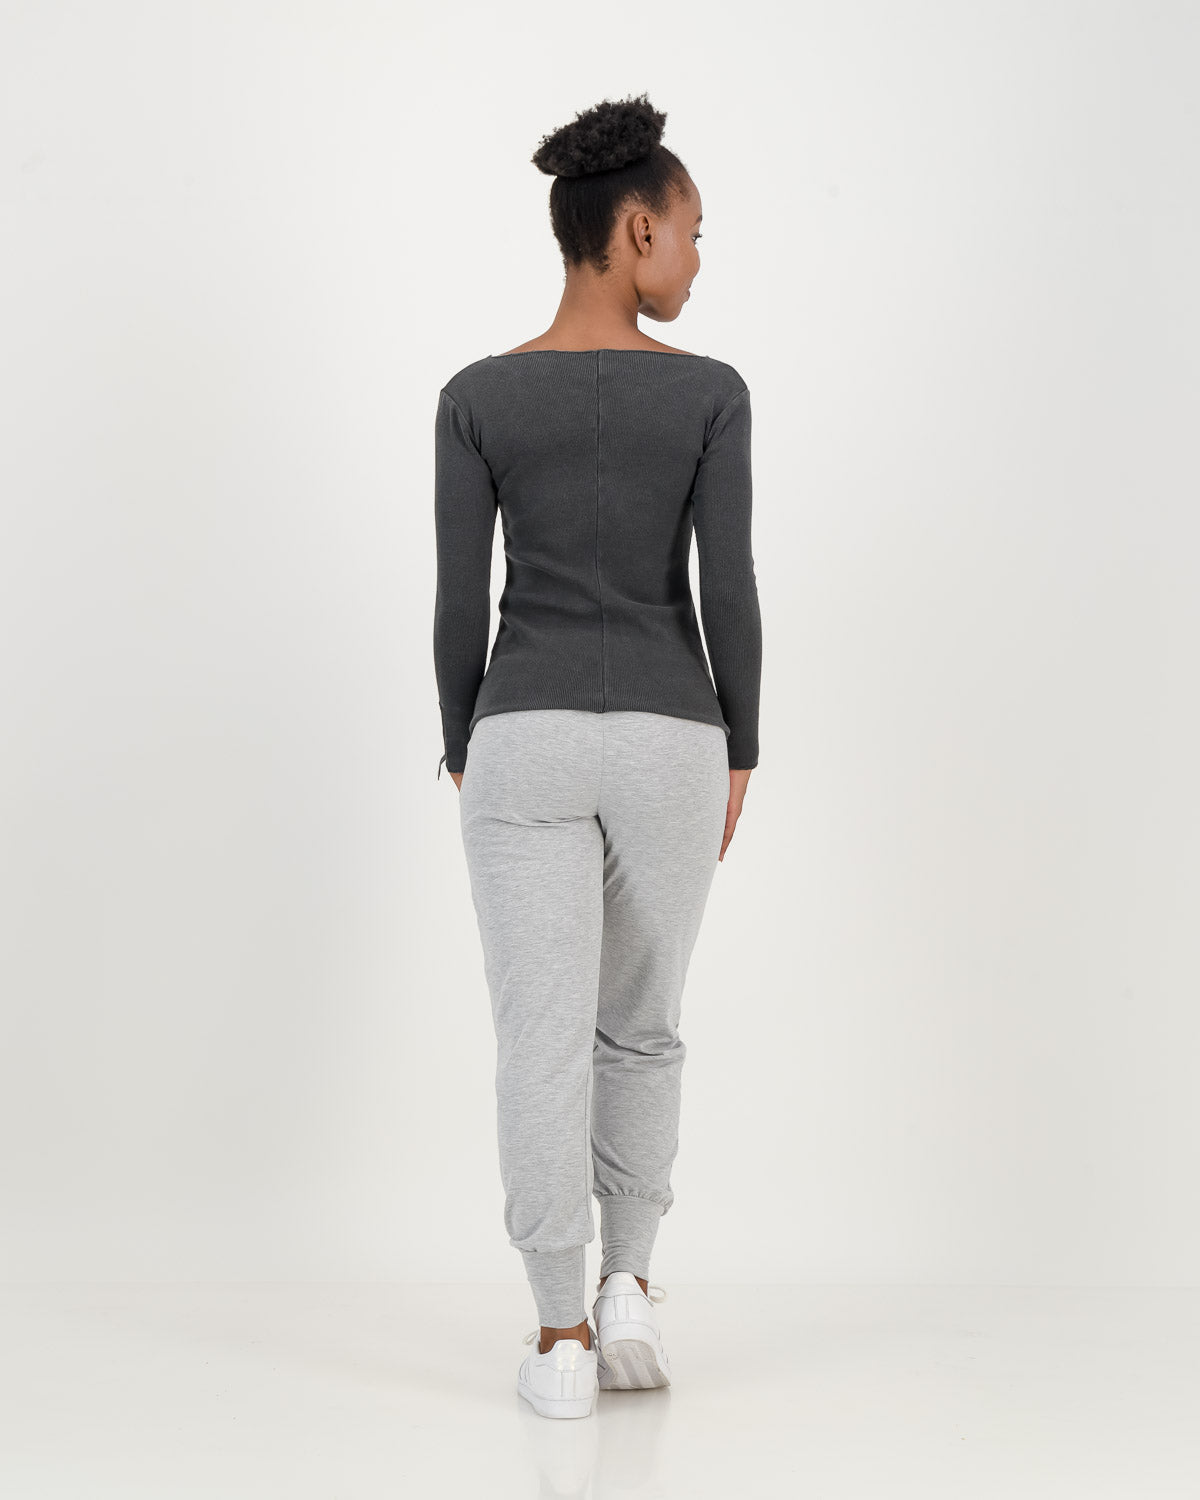 back view of Overdyed Cotton charcoal Rib Top with light grey comfy pants